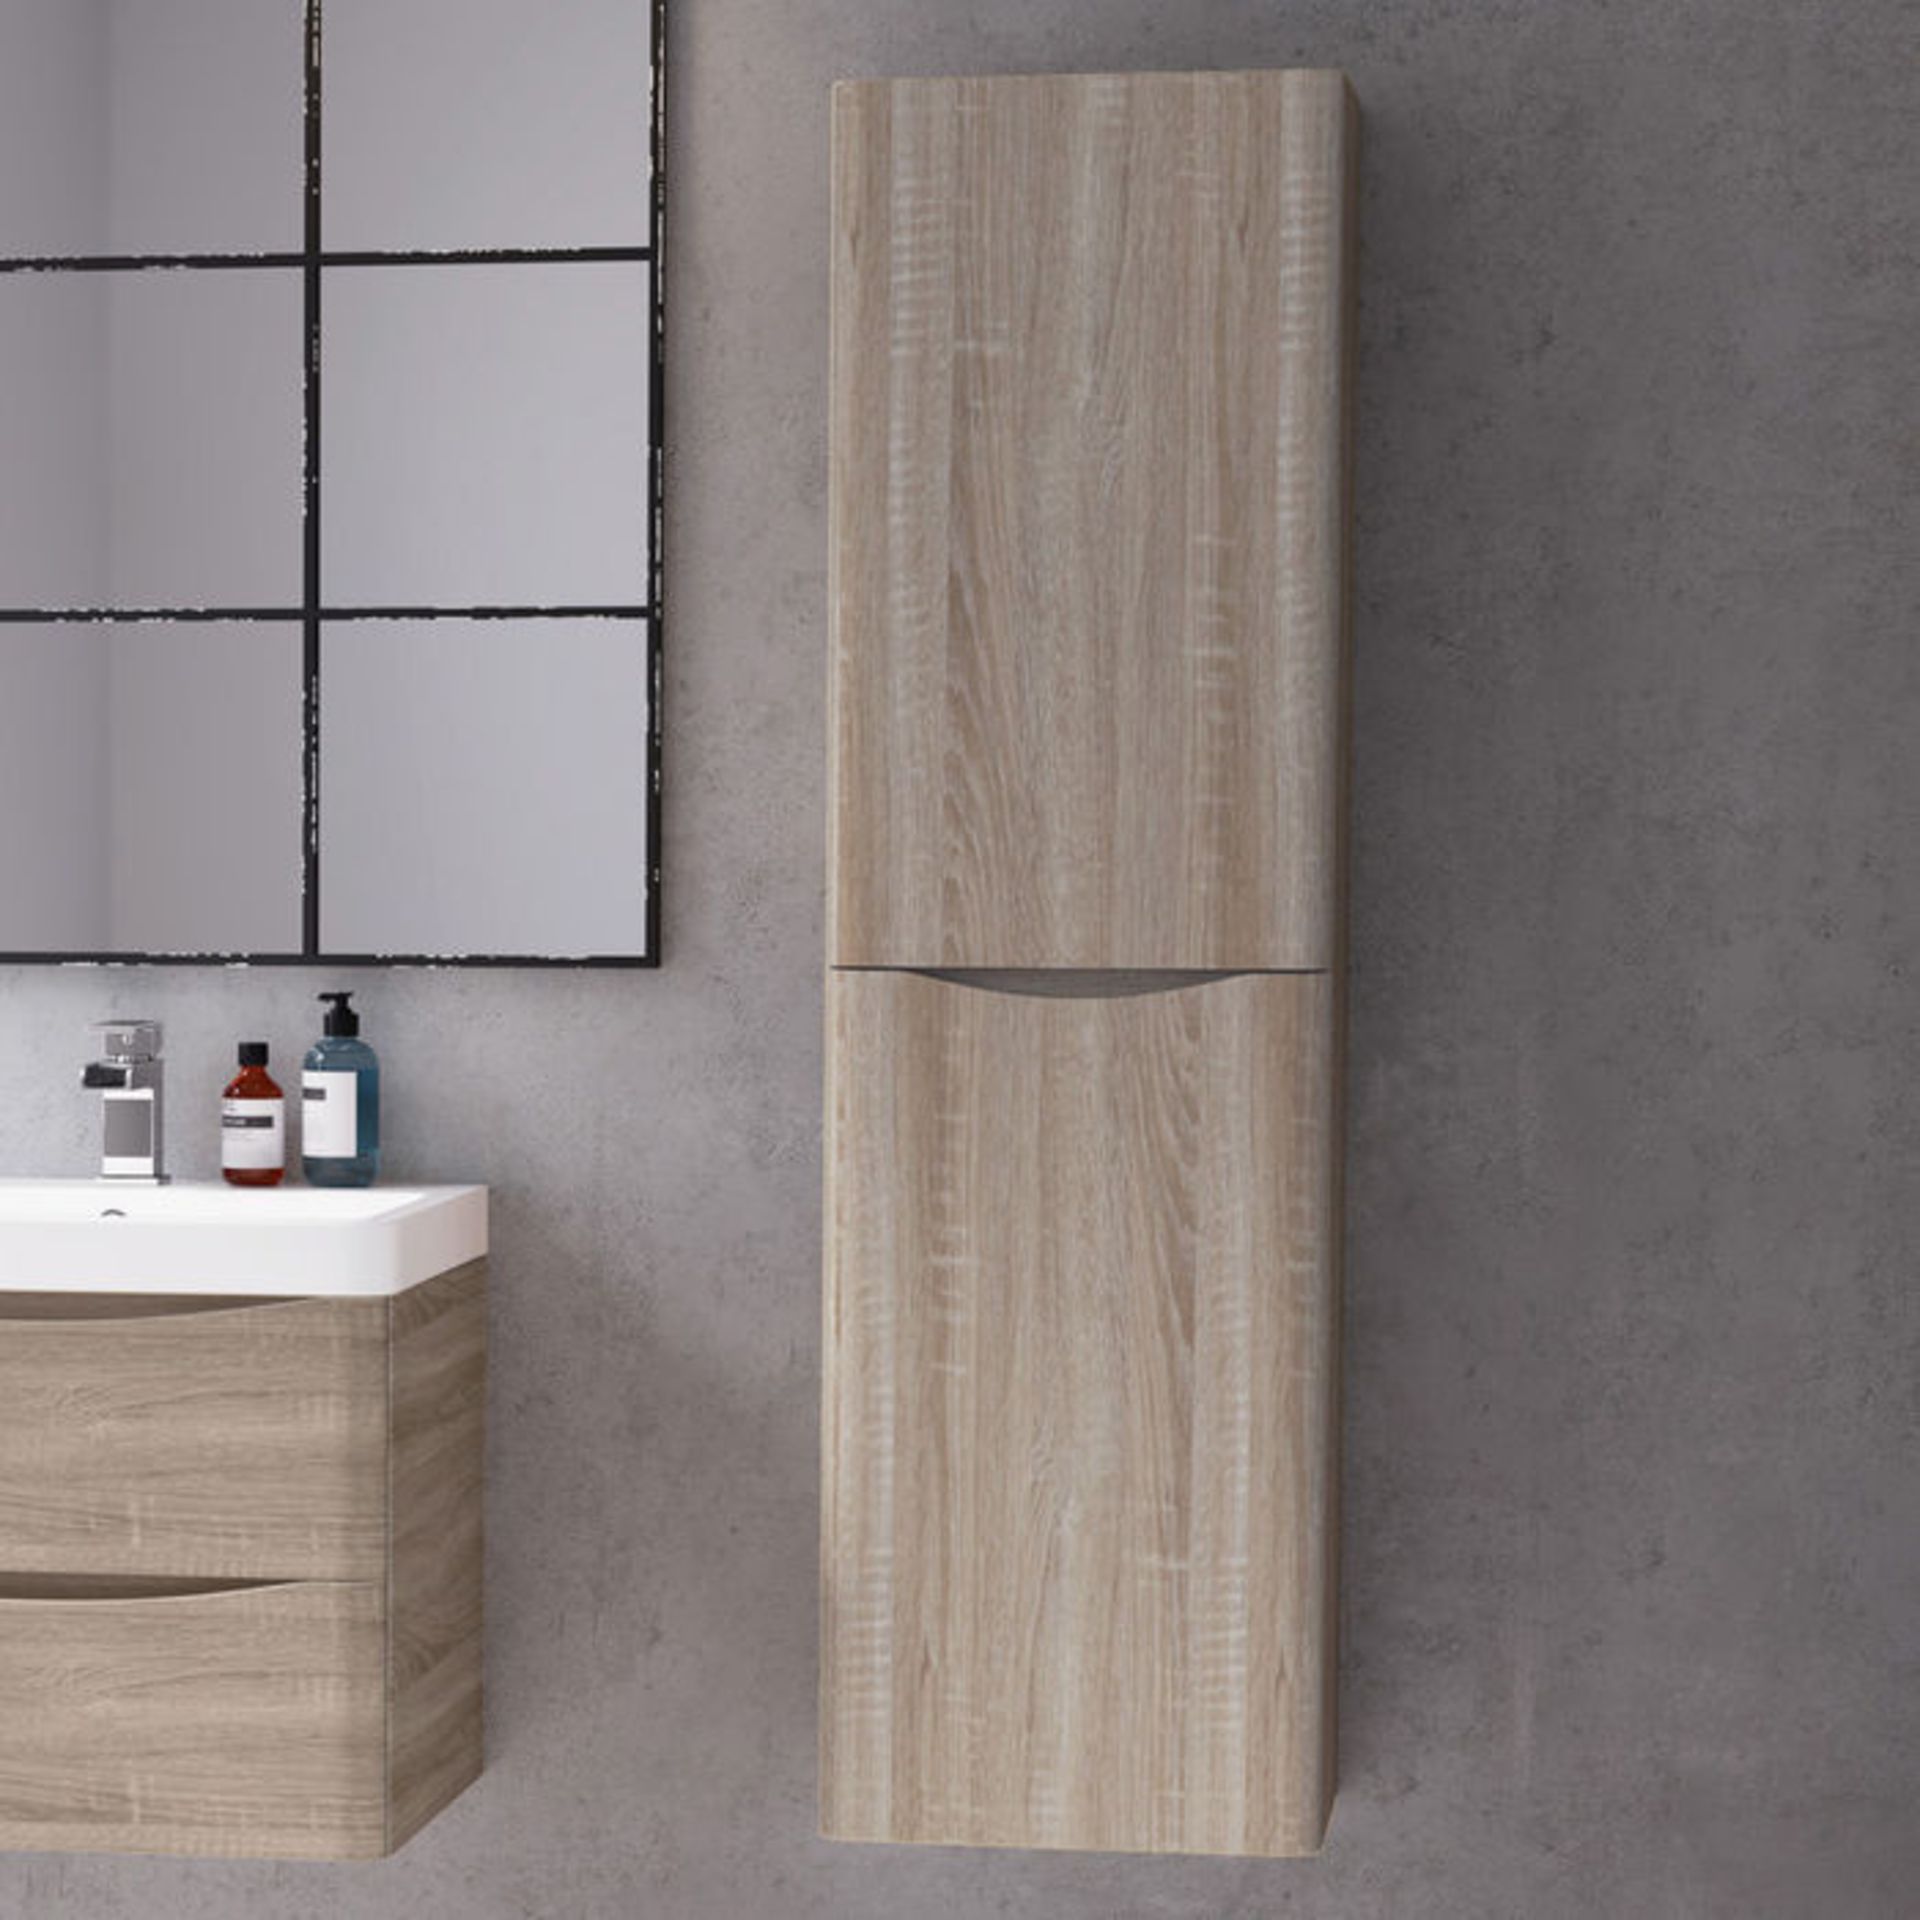 (EY64) 1400mm Austin II Light Oak Effect Tall Wall Hung Storage Cabinet - Right Hand. RRP £299.99. - Image 2 of 3